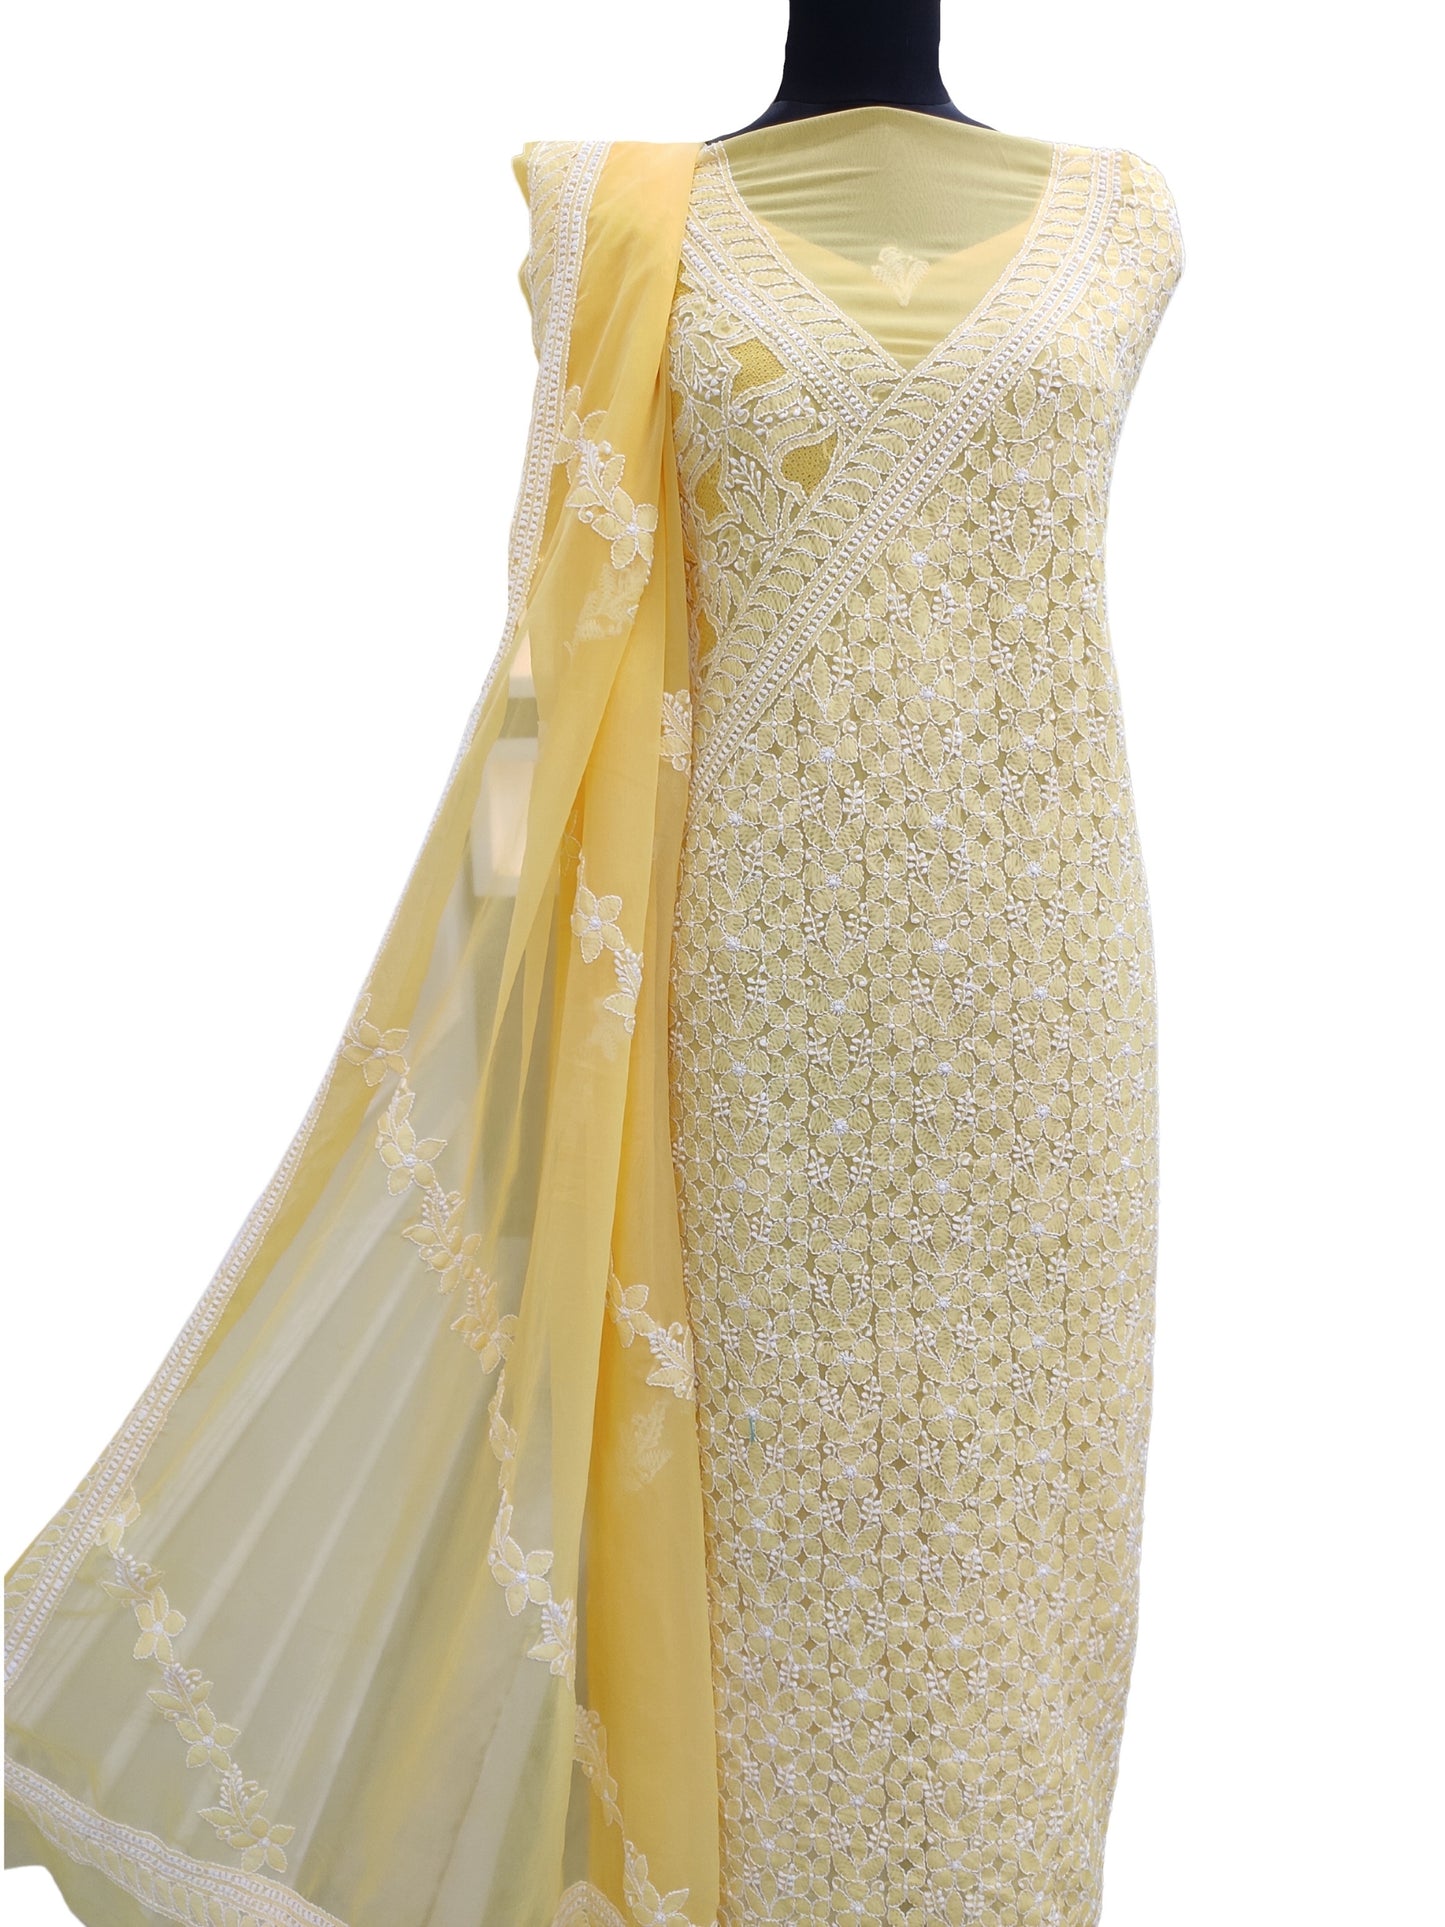 Shyamal Chikan Hand Embroidered Yellow High Quality Georgette Lucknowi Chikankari Unstitched Suit Piece With Four Side Border Dupatta - S12131